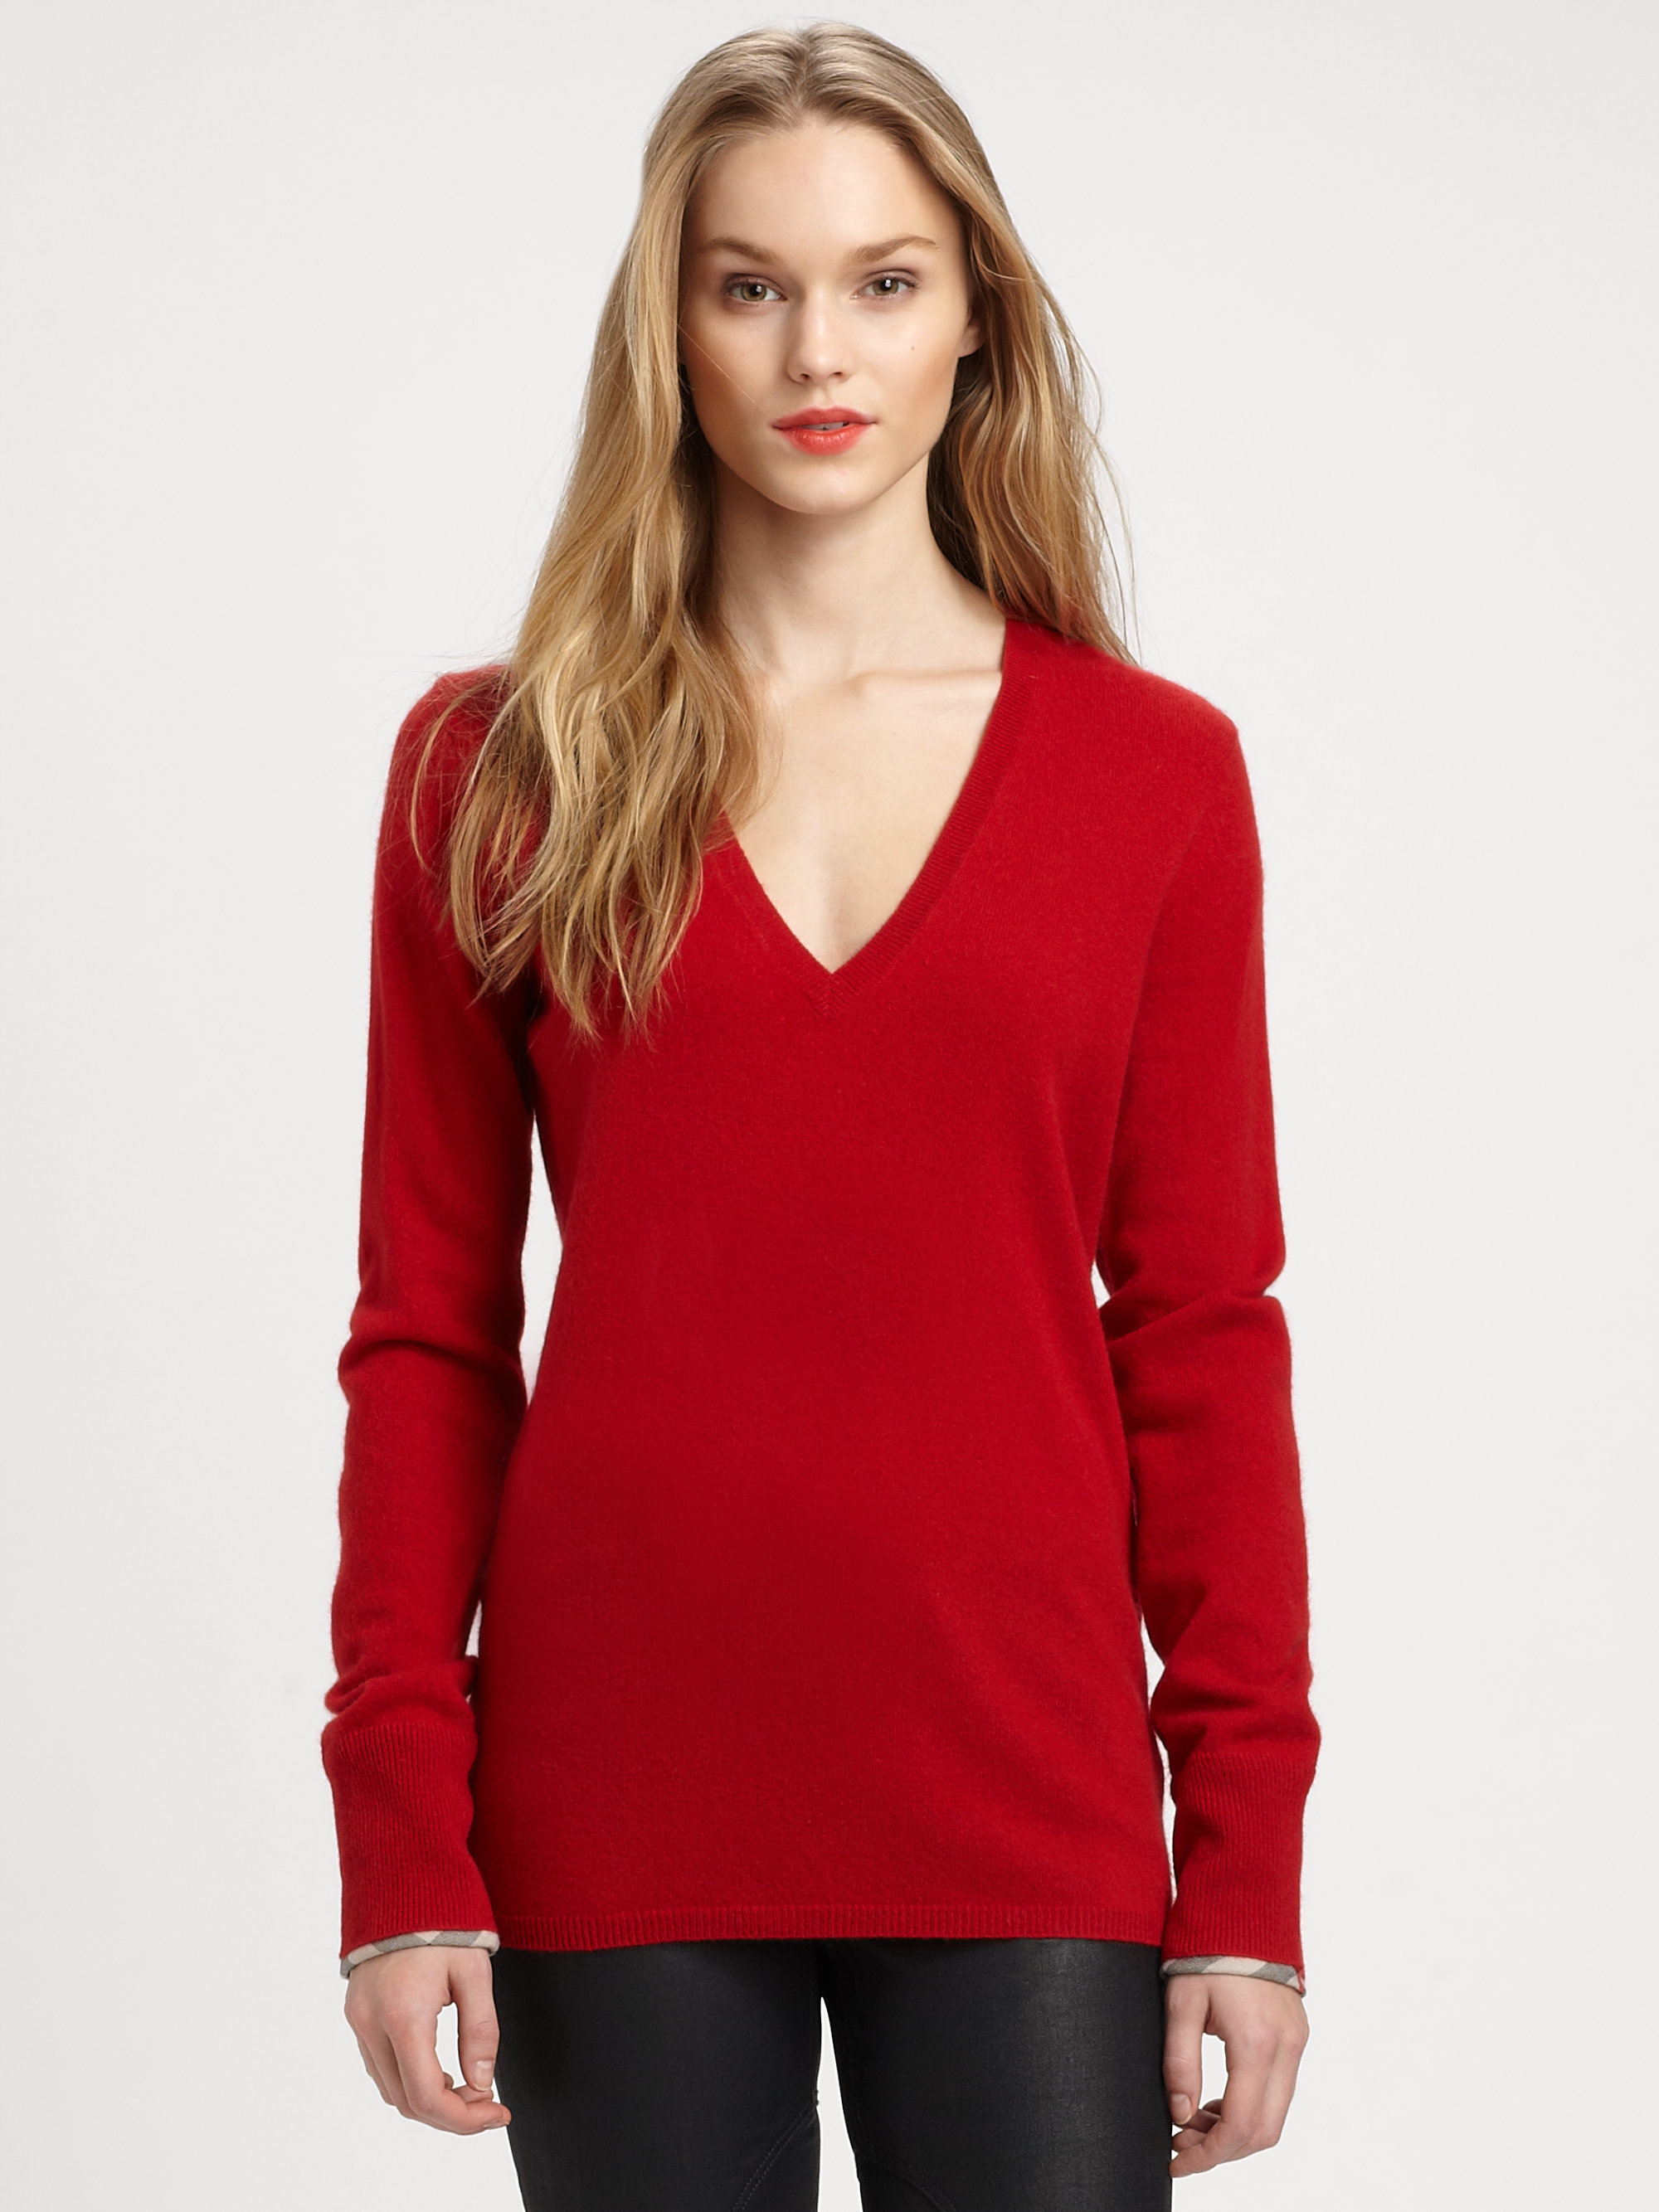 Burberry Brit Cashmere Sweater Sale Online, SAVE 46% - pacificlanding.ca